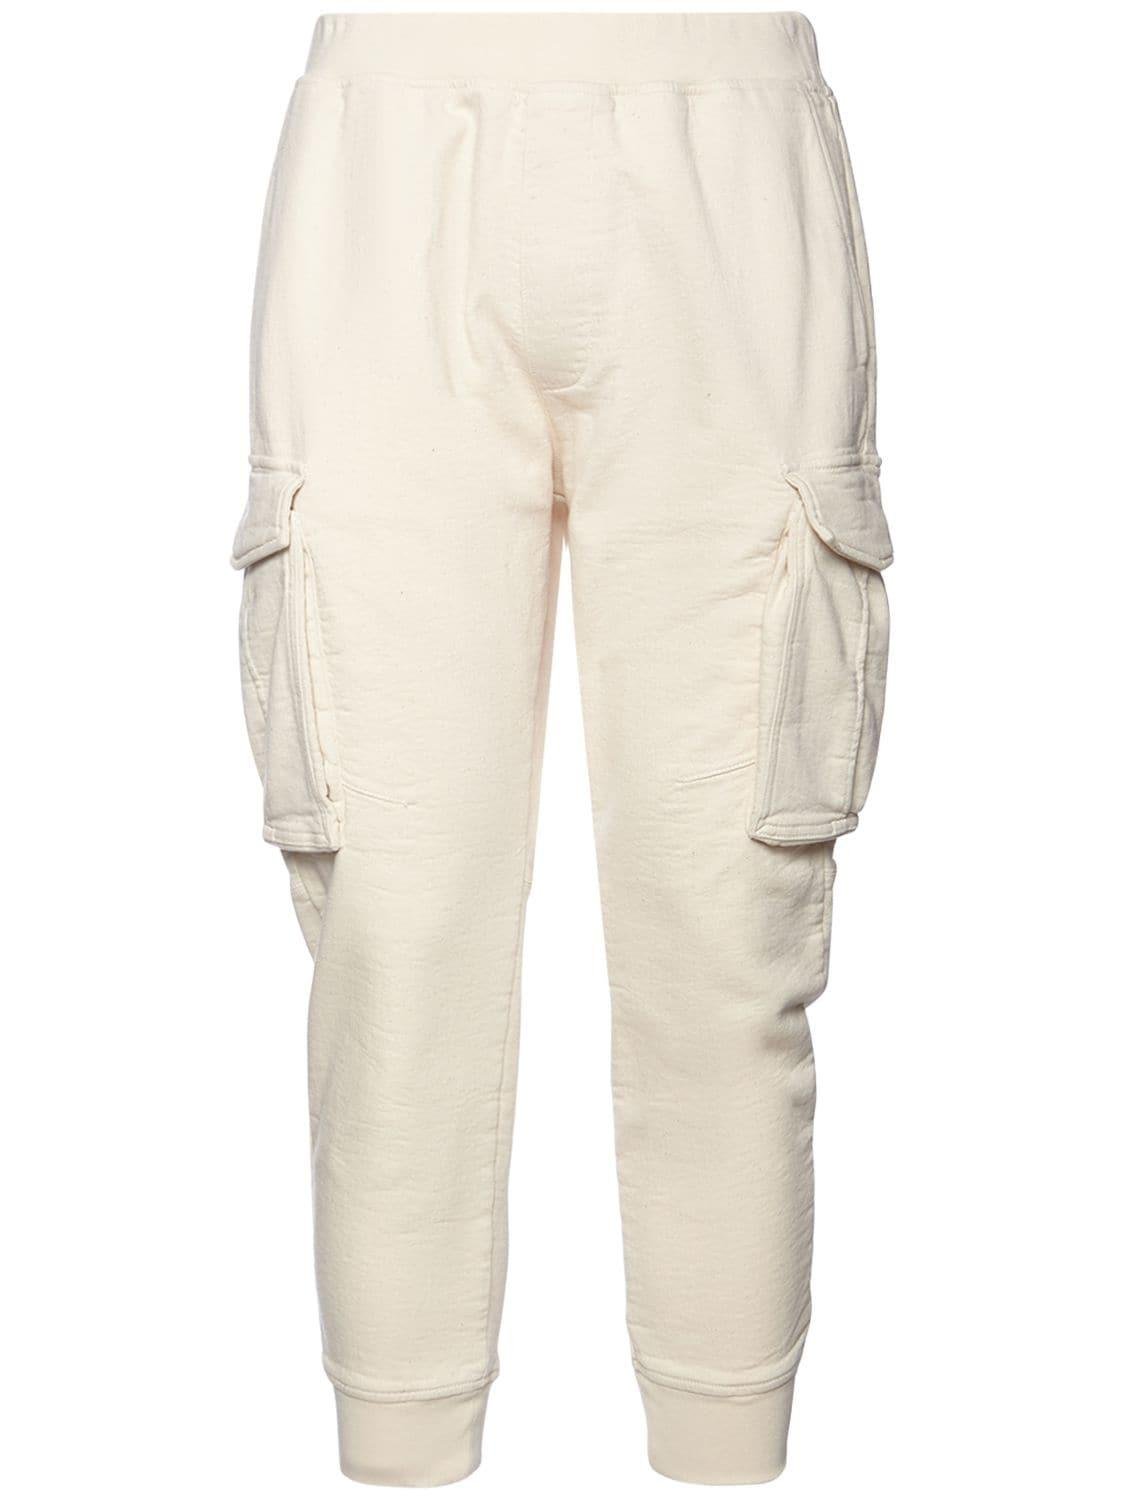 Cargo Pants W/ Elastic Waistband by DSQUARED2